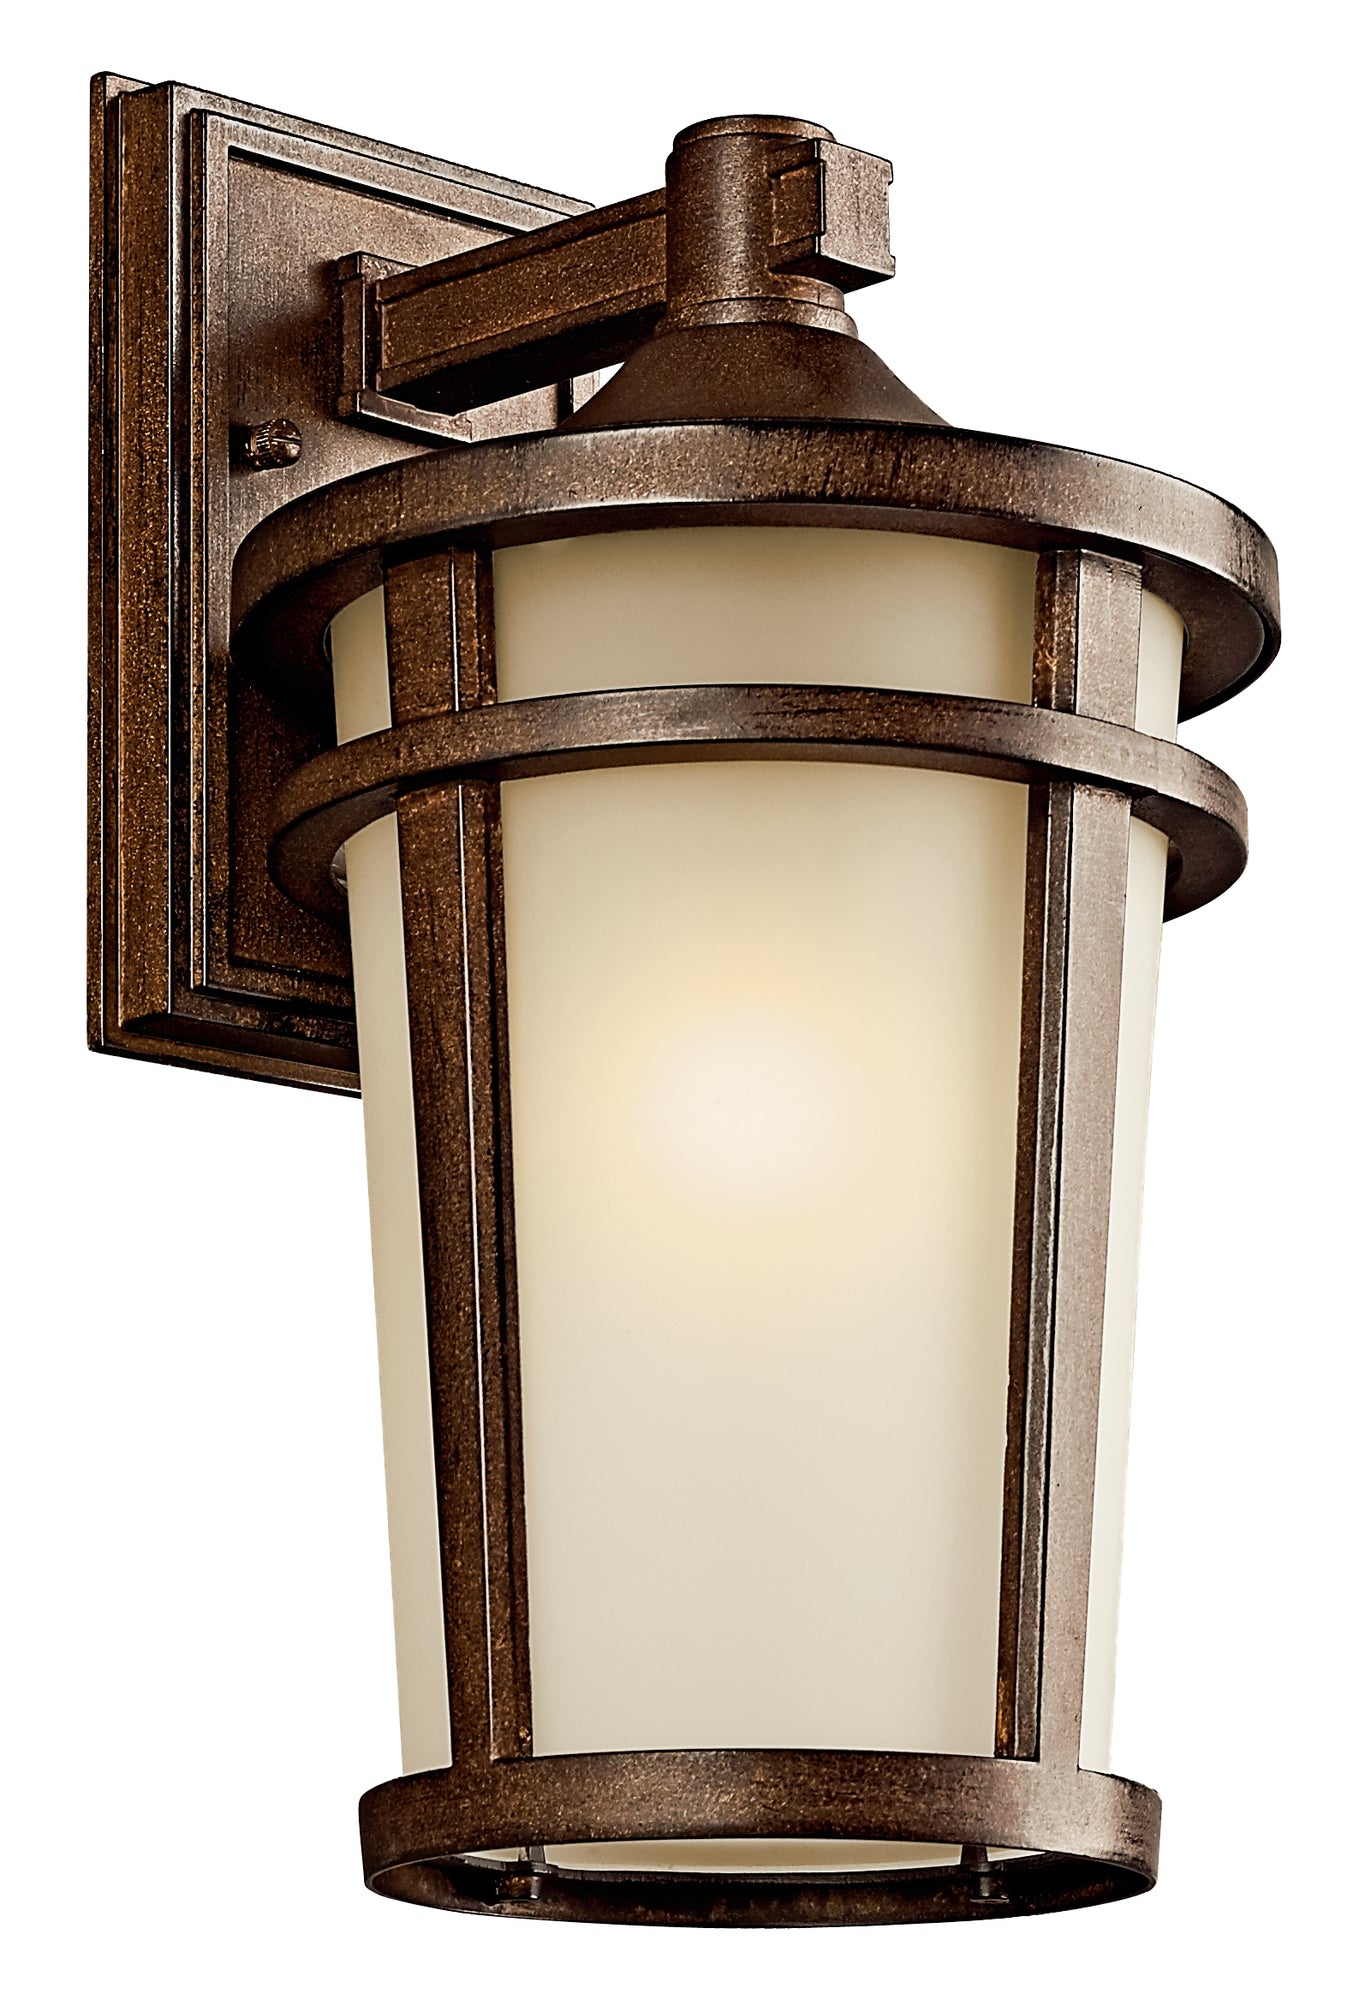 ATWOOD Outdoor sconce Brown - 49072BST | KICHLER